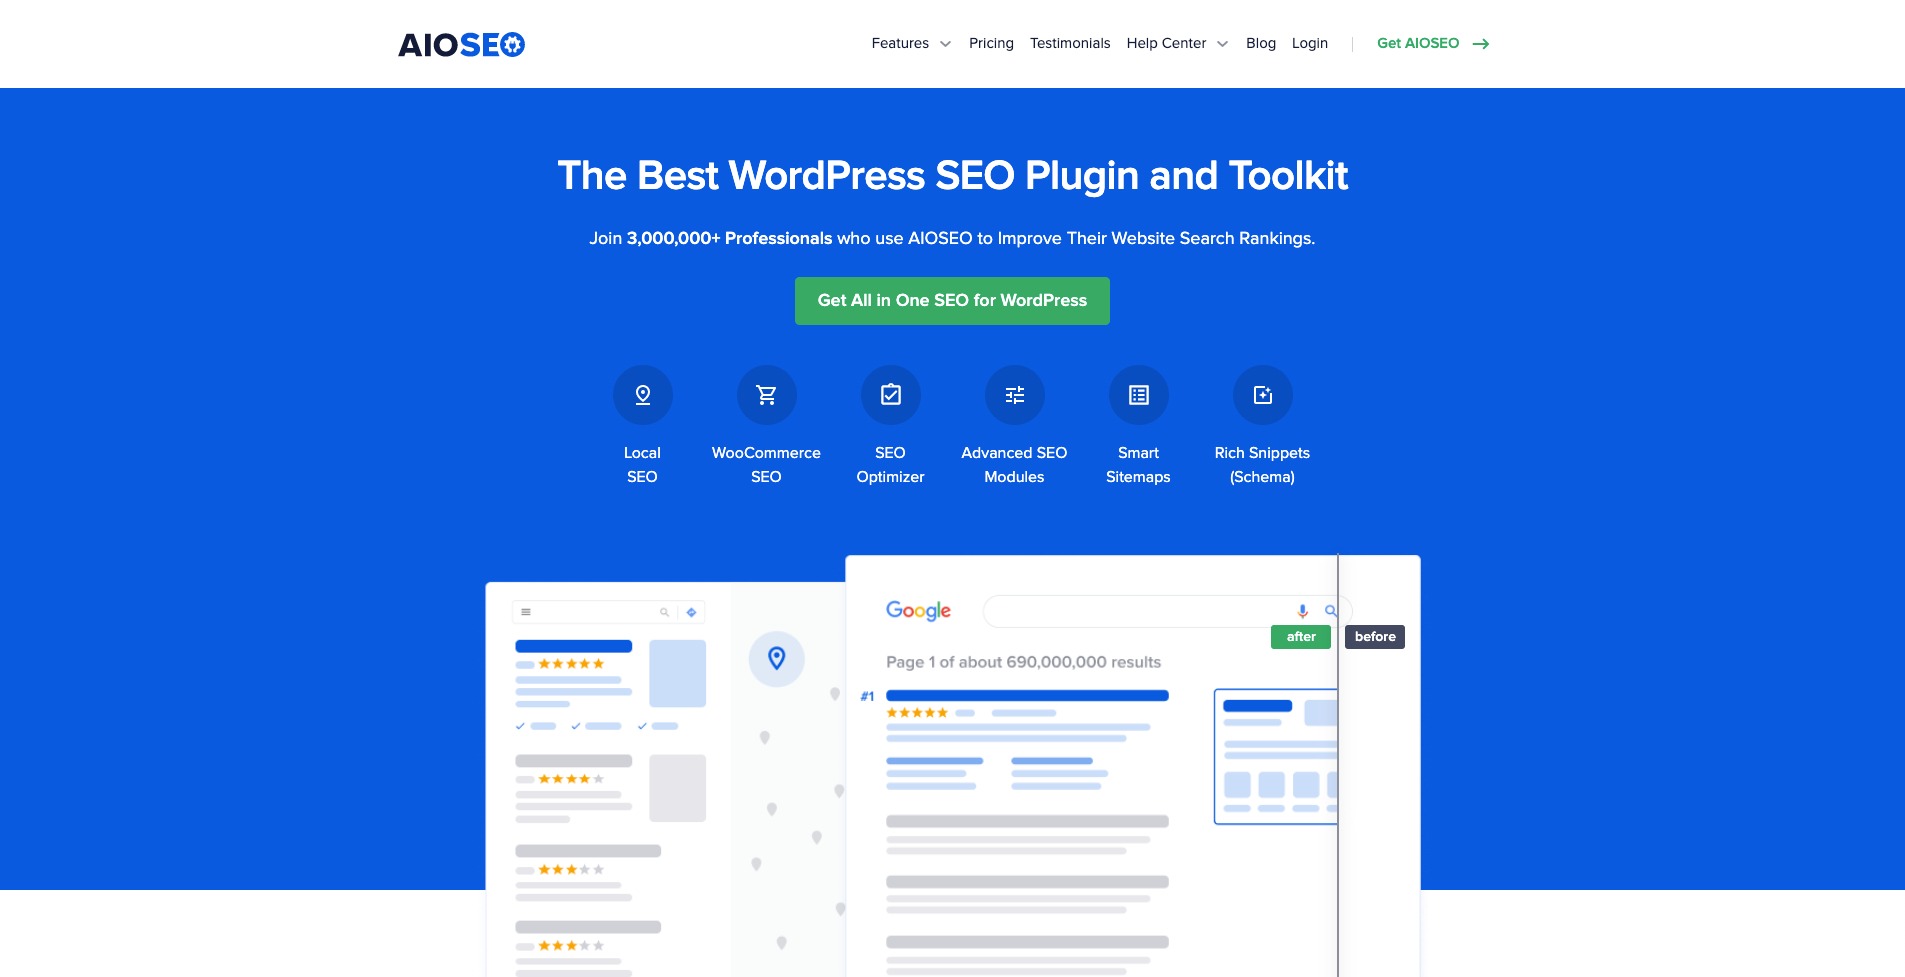 All-in-One-SEO-Pack-Best-WordPress-SEO-Plugin-and-Toolkit